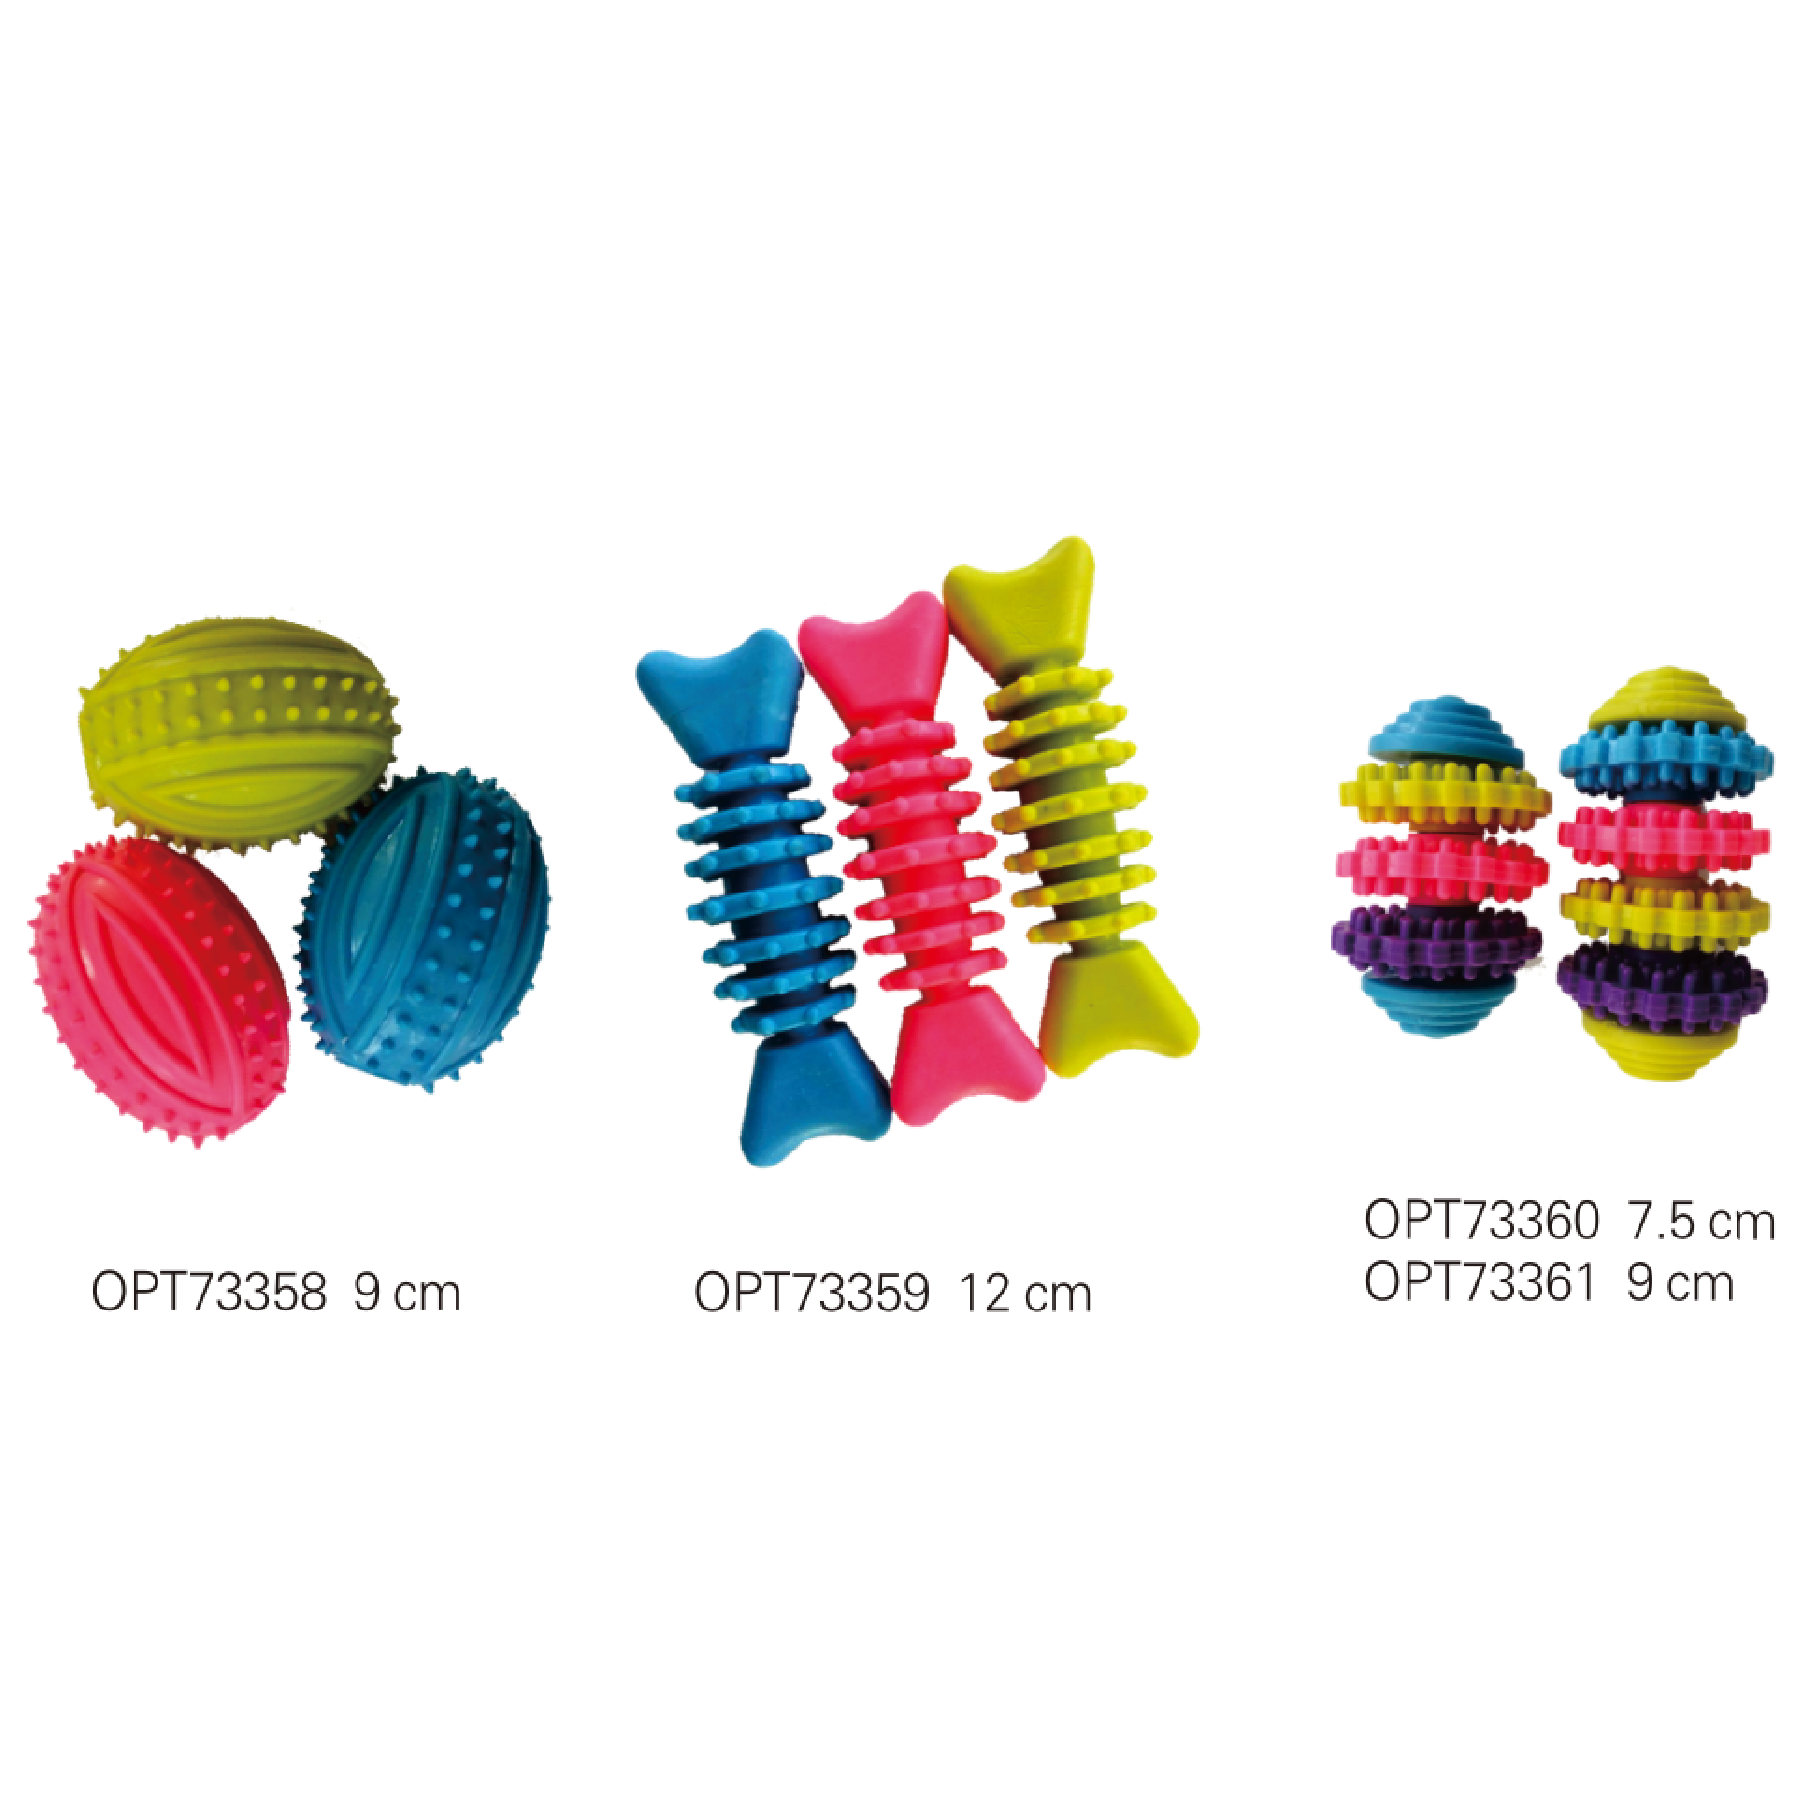 OPT73358-OPT73361 Dog toy rubber